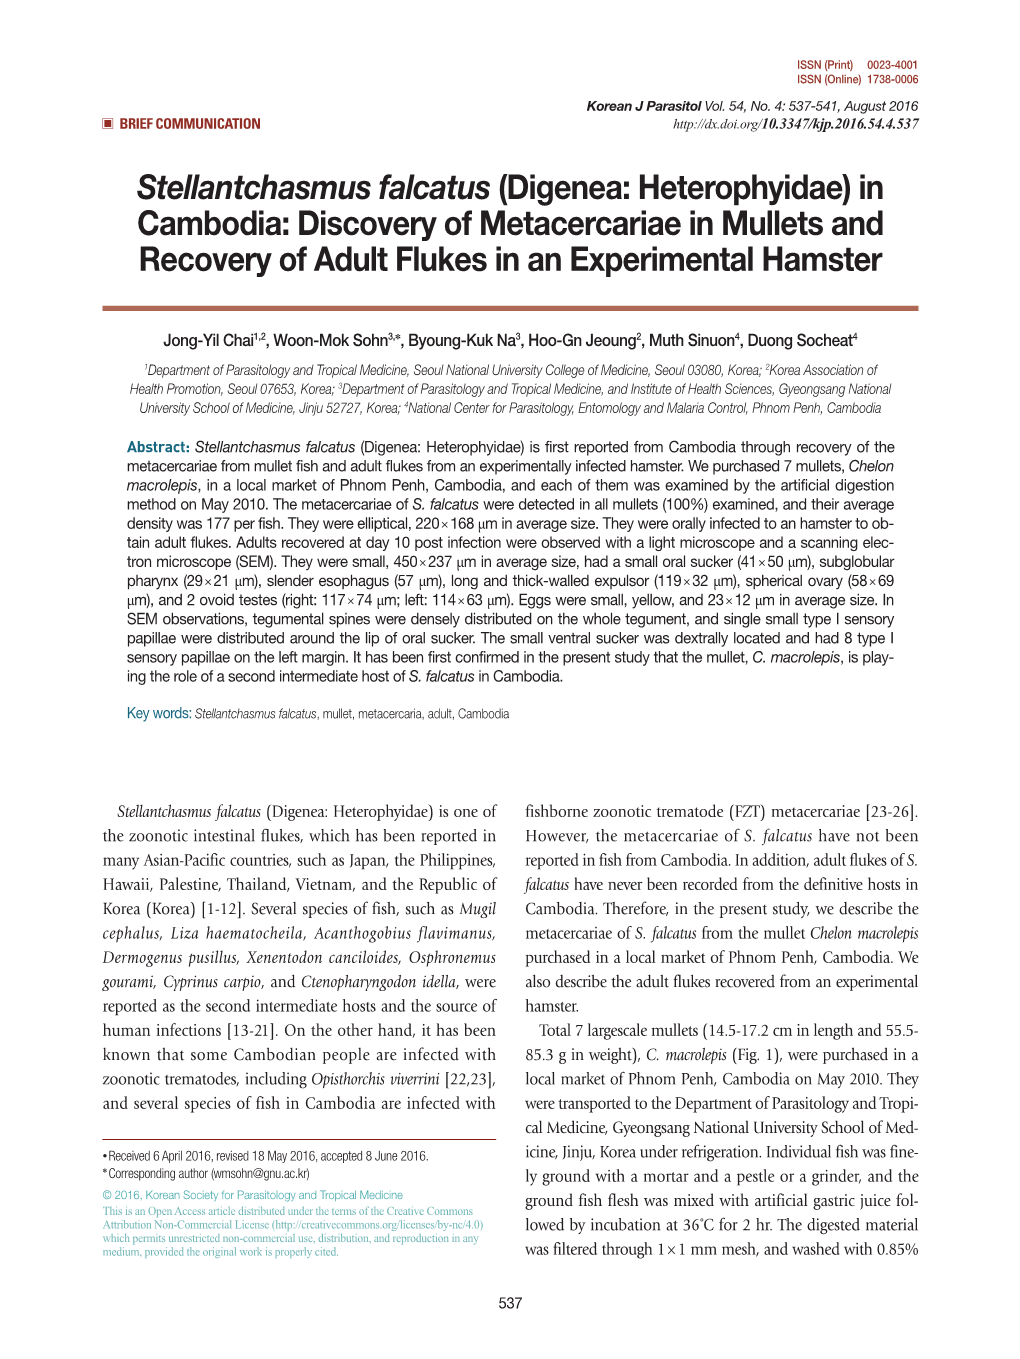 Stellantchasmus Falcatus (Digenea: Heterophyidae) in Cambodia: Discovery of Metacercariae in Mullets and Recovery of Adult Flukes in an Experimental Hamster